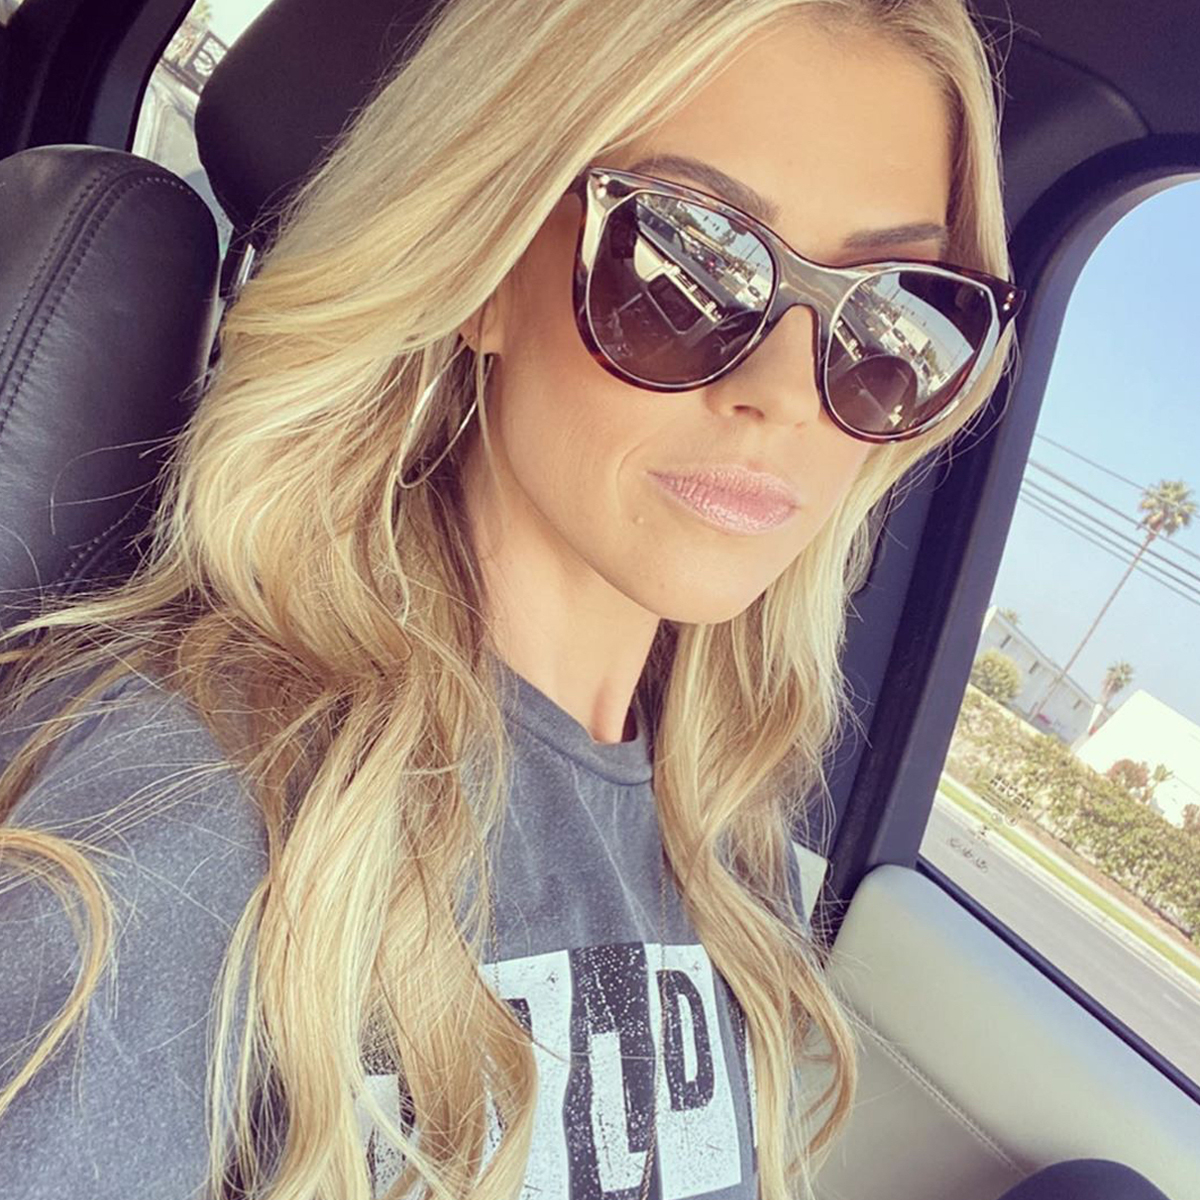 Christina Anstead unveils dramatic tattoo amid divorce from ant